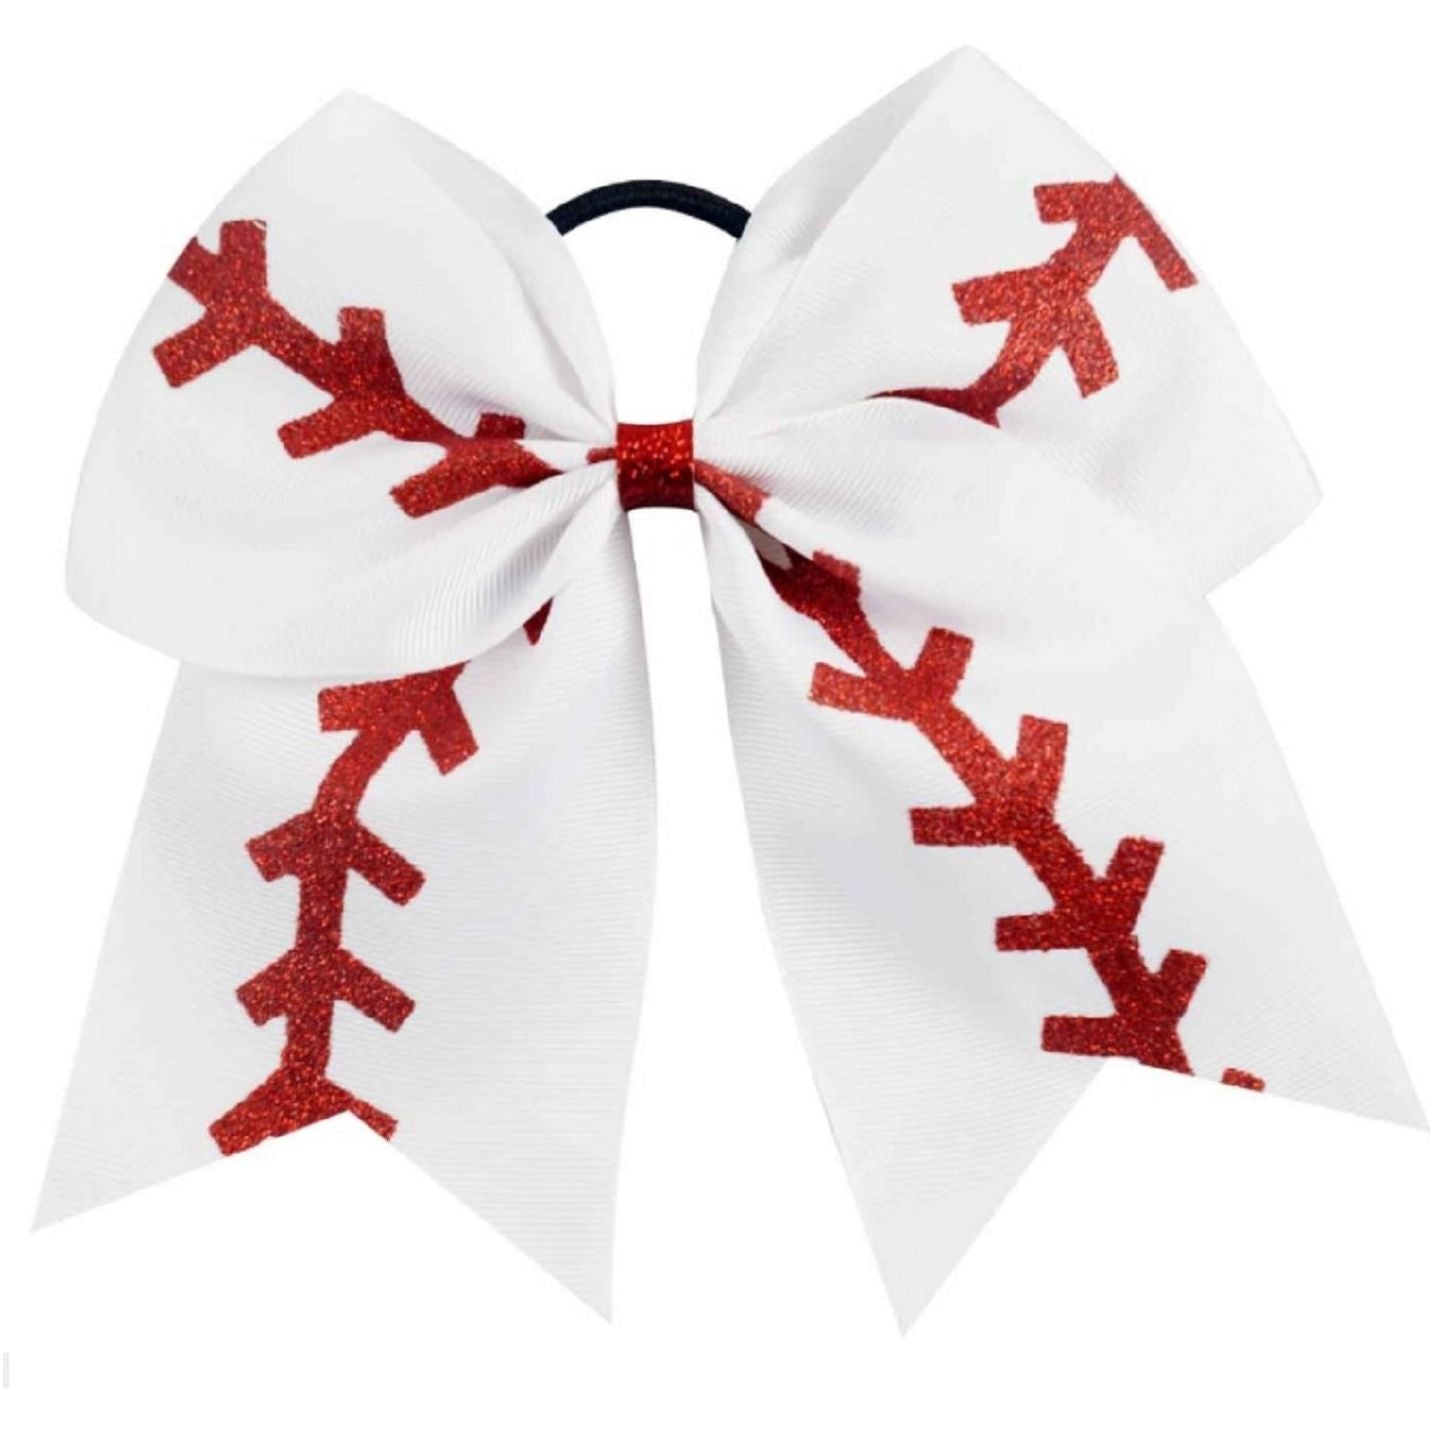 Red Cheer Bow for Girls Large Hair Bows with Ponytail Holder Ribbon | Kenz Laurenz